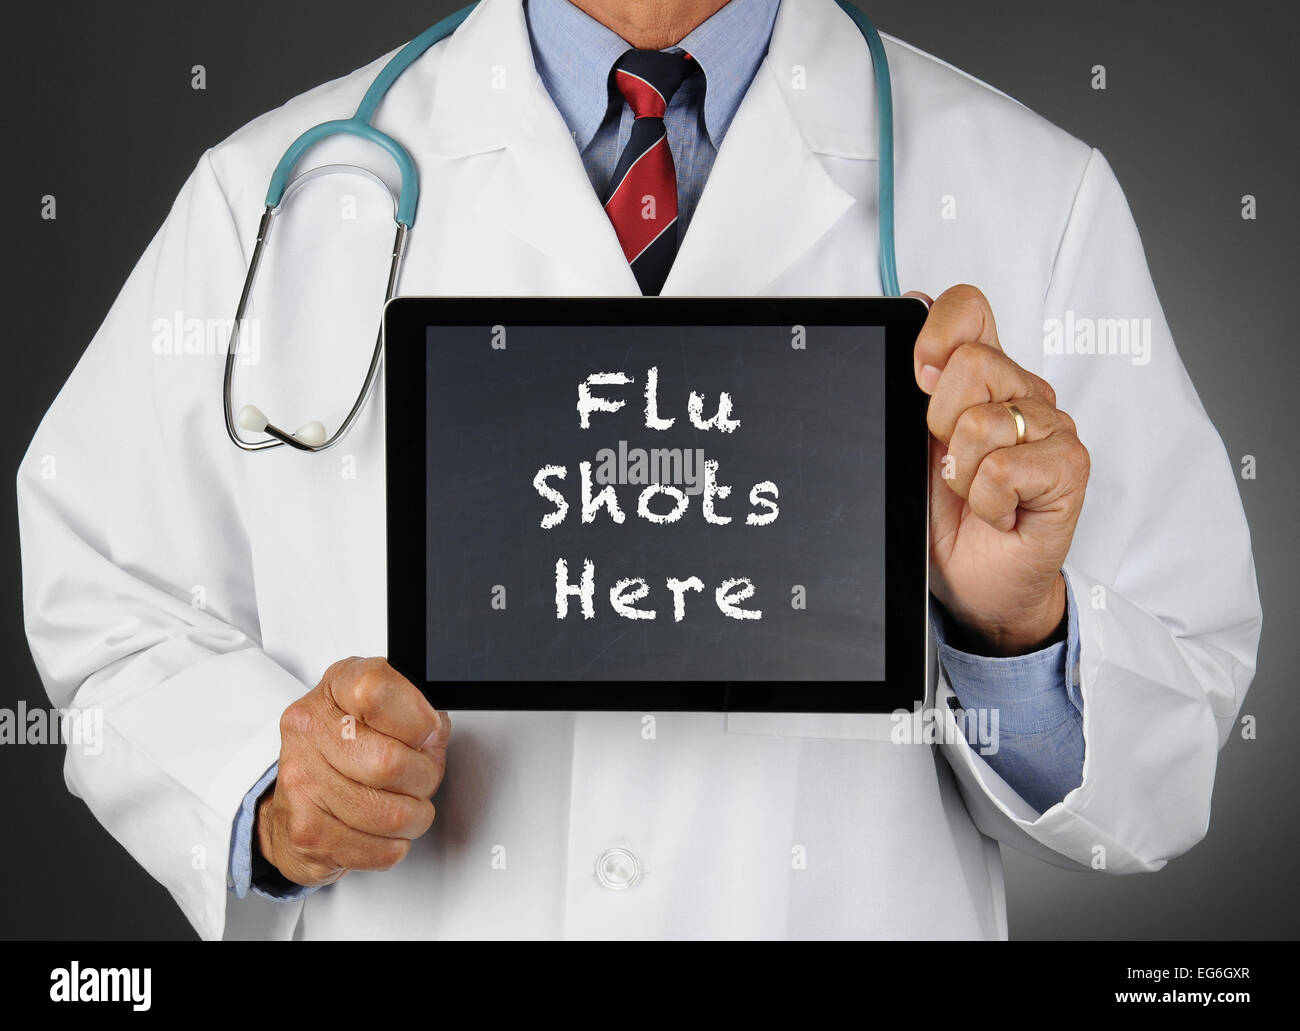 Closeup of a doctor holding a tablet computer with a chalkboard screen with the words Flu Shots Here. Man is unrecognizable. Stock Photo